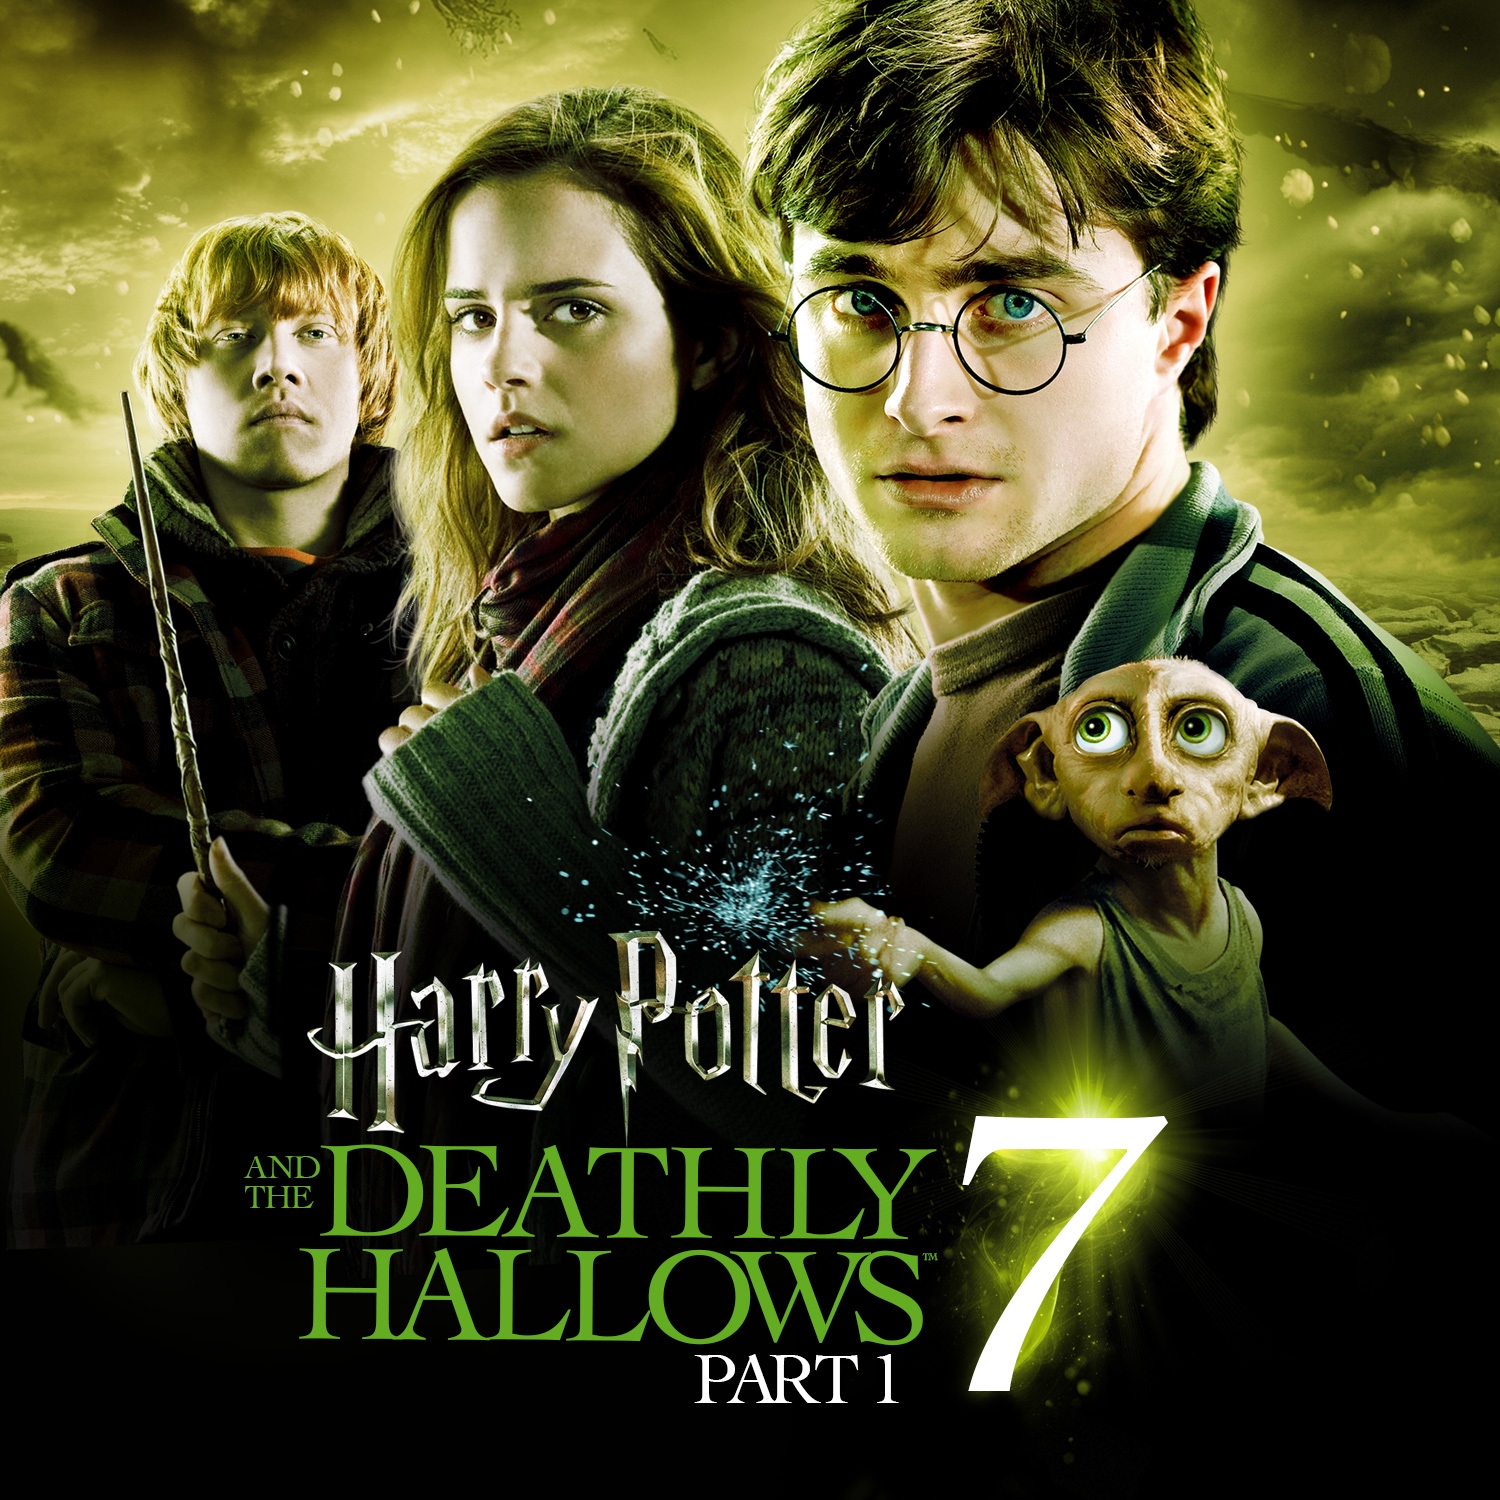 harry potter and the deathly hallows part 2 full movie free online